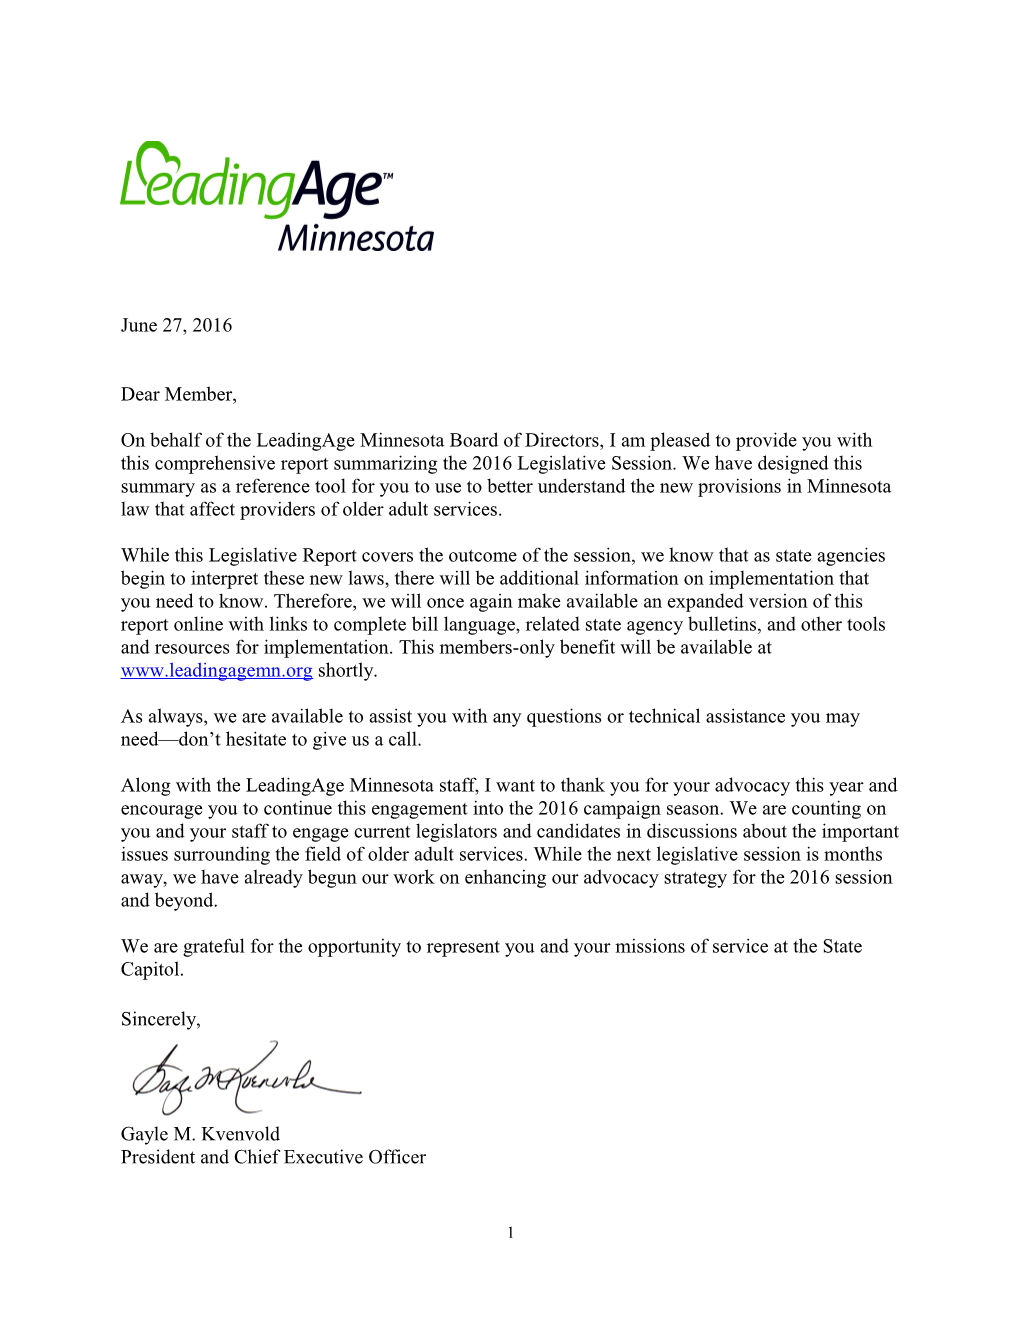 On Behalf of the Leadingage Minnesota Board of Directors, I Am Pleased to Provide You With